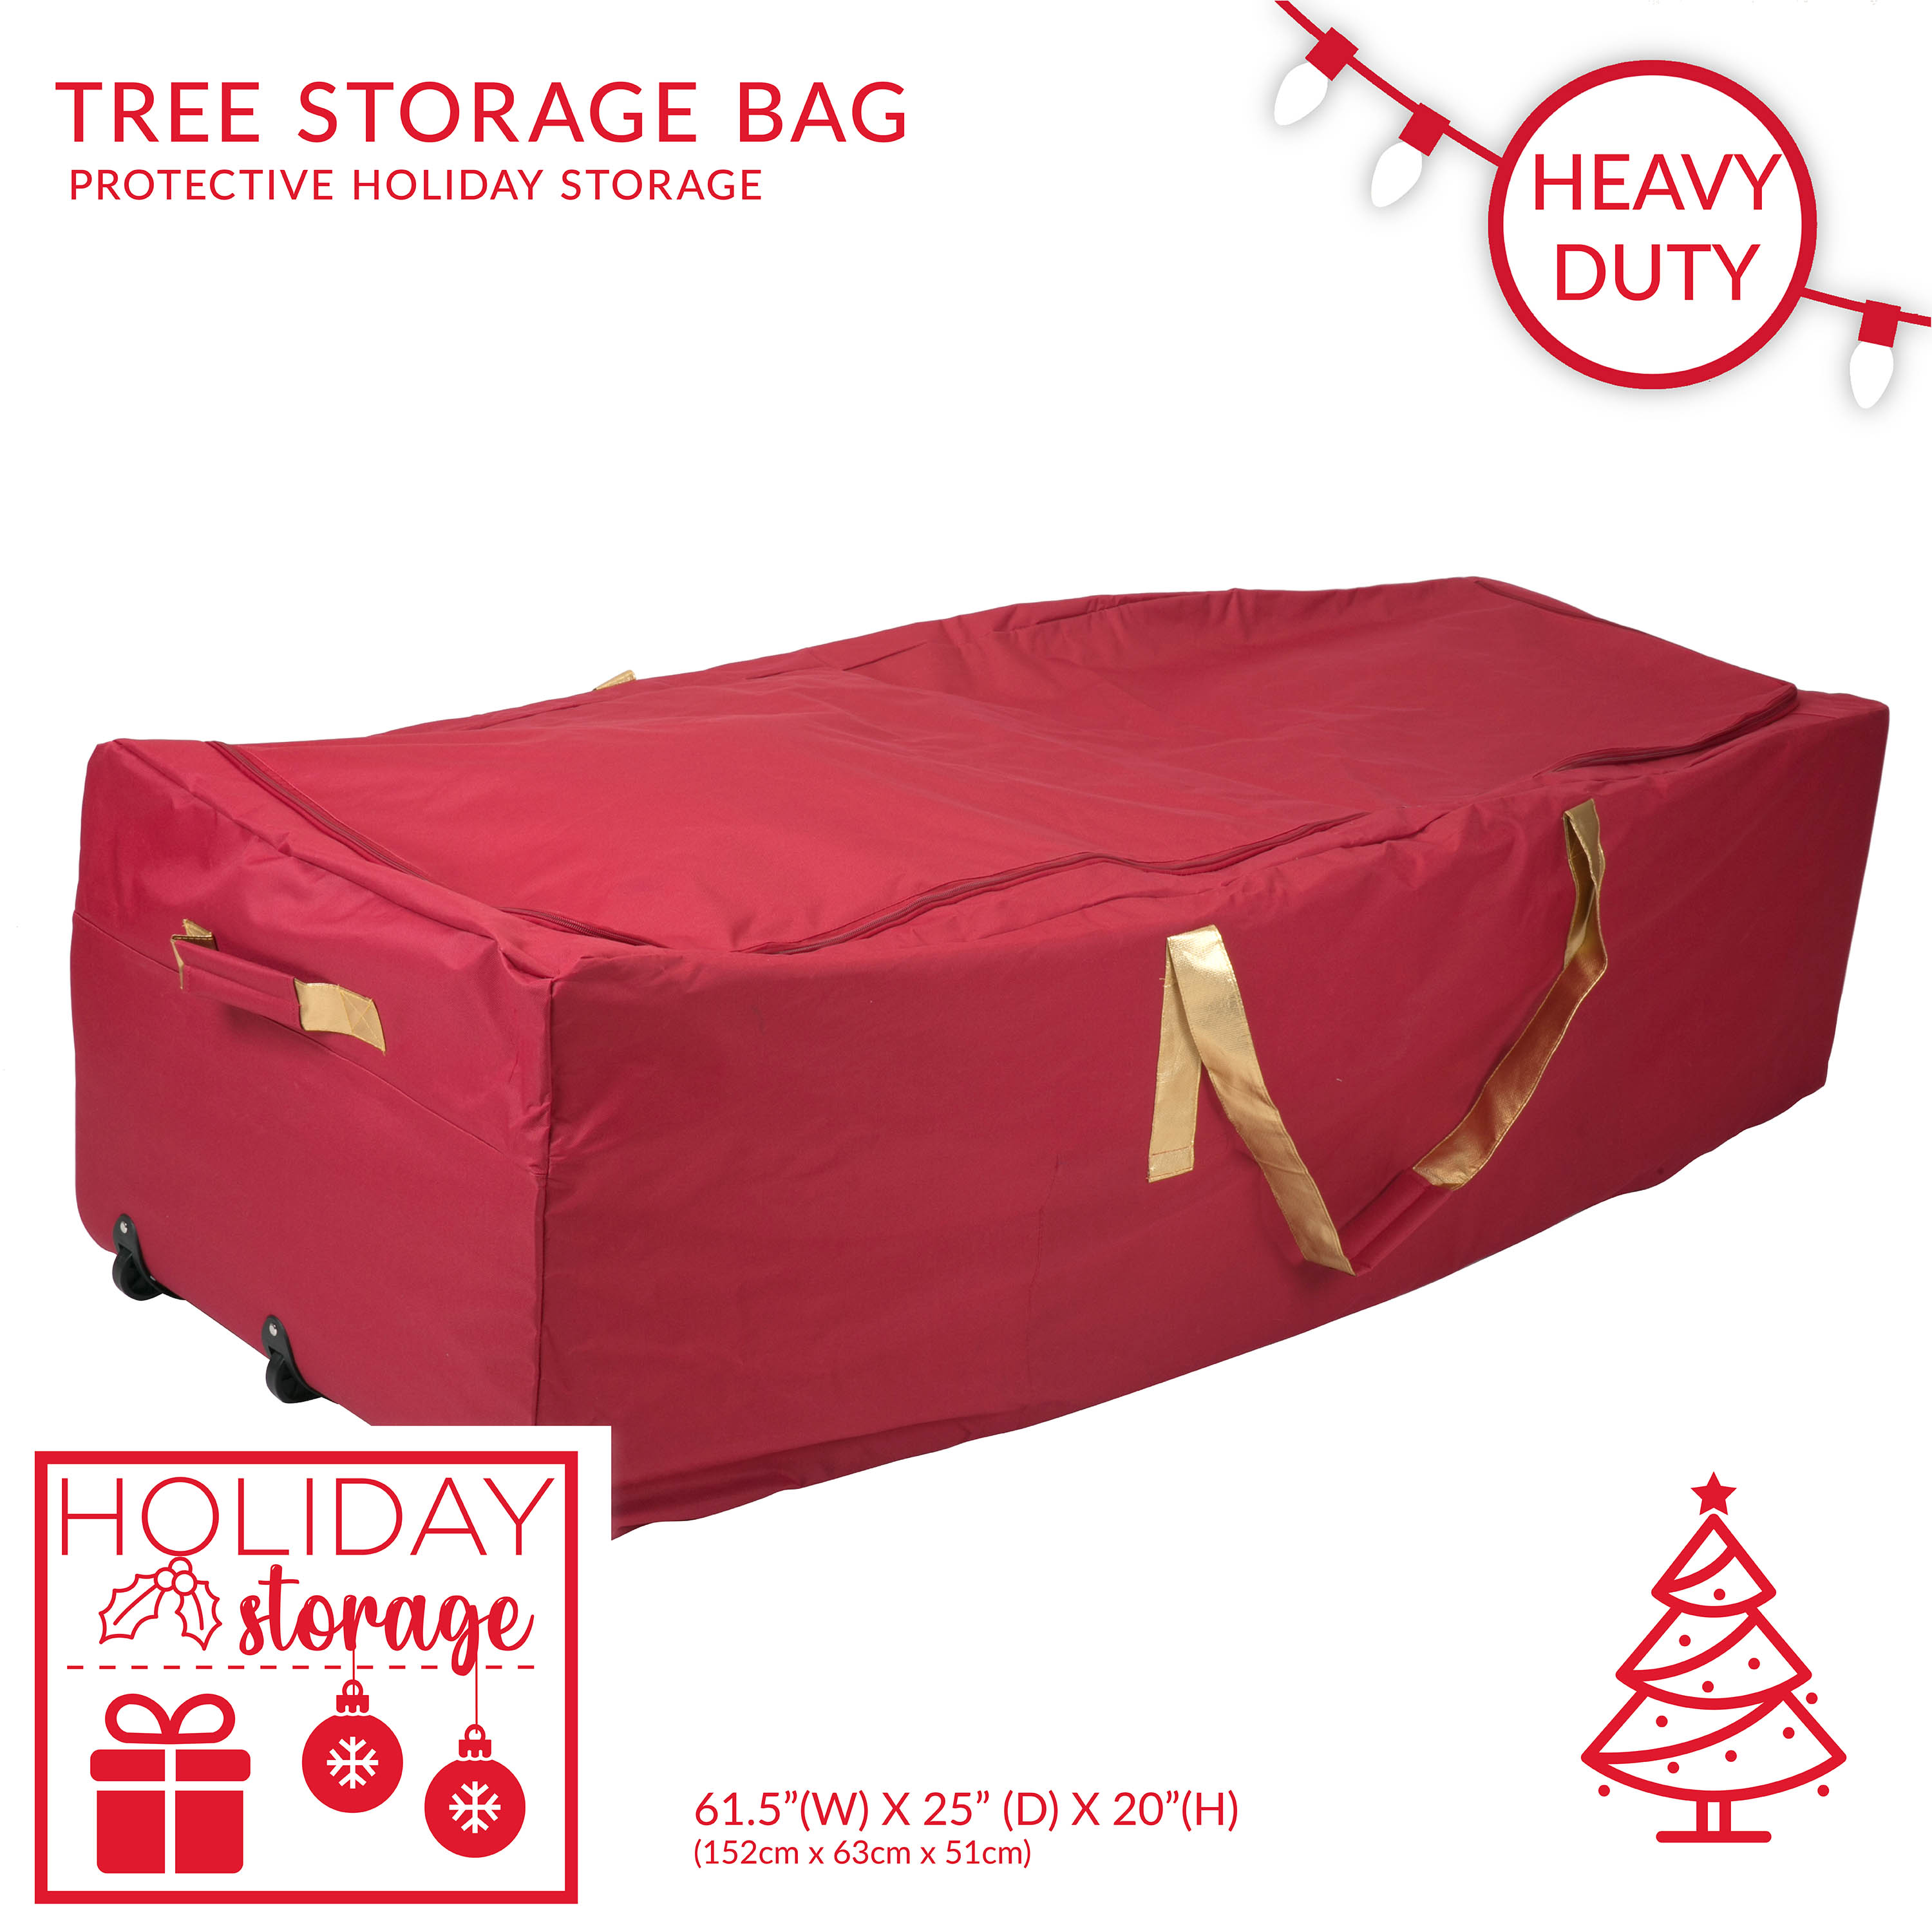 Simplify Holiday Christmas Tree Storage Bag, Polyester, with Wheels, Red - image 3 of 10